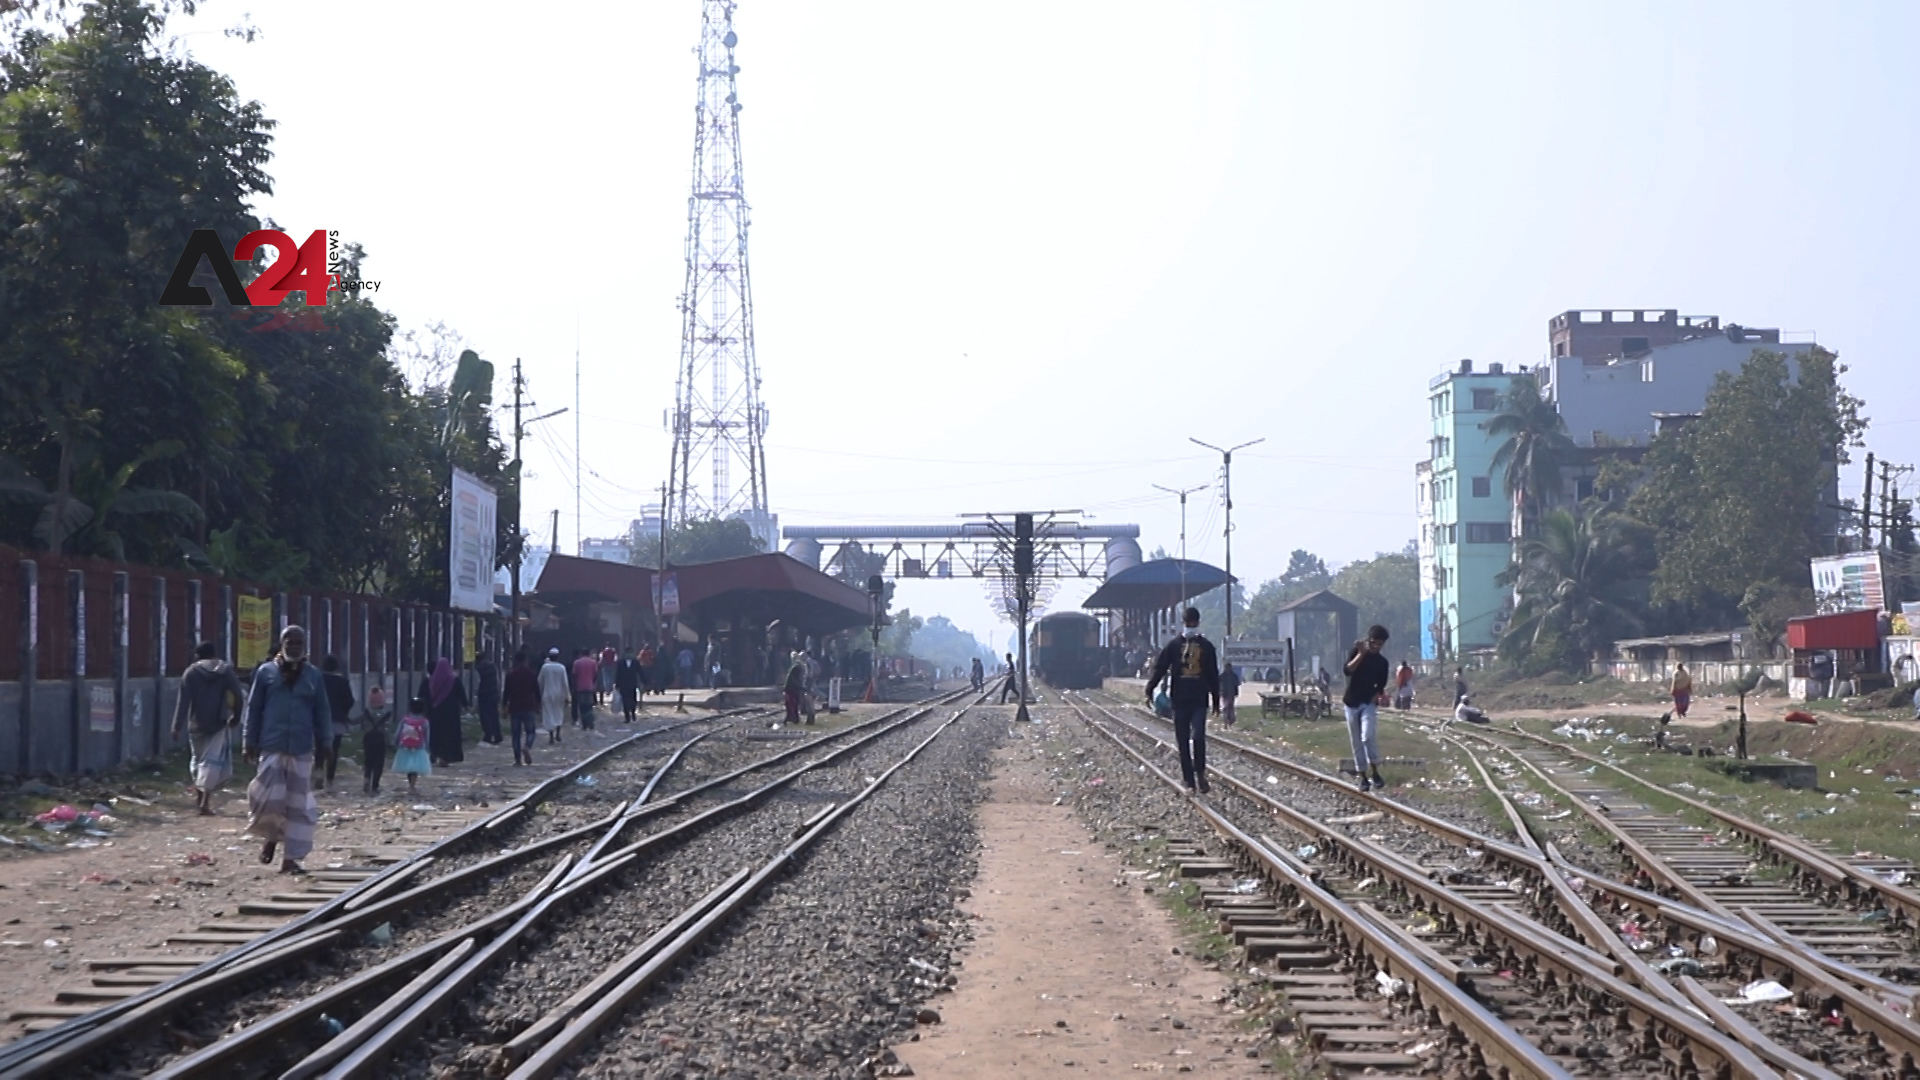 Bangladesh – Disruption of foreign funding threatens promising railway projects, as gov’t explores.